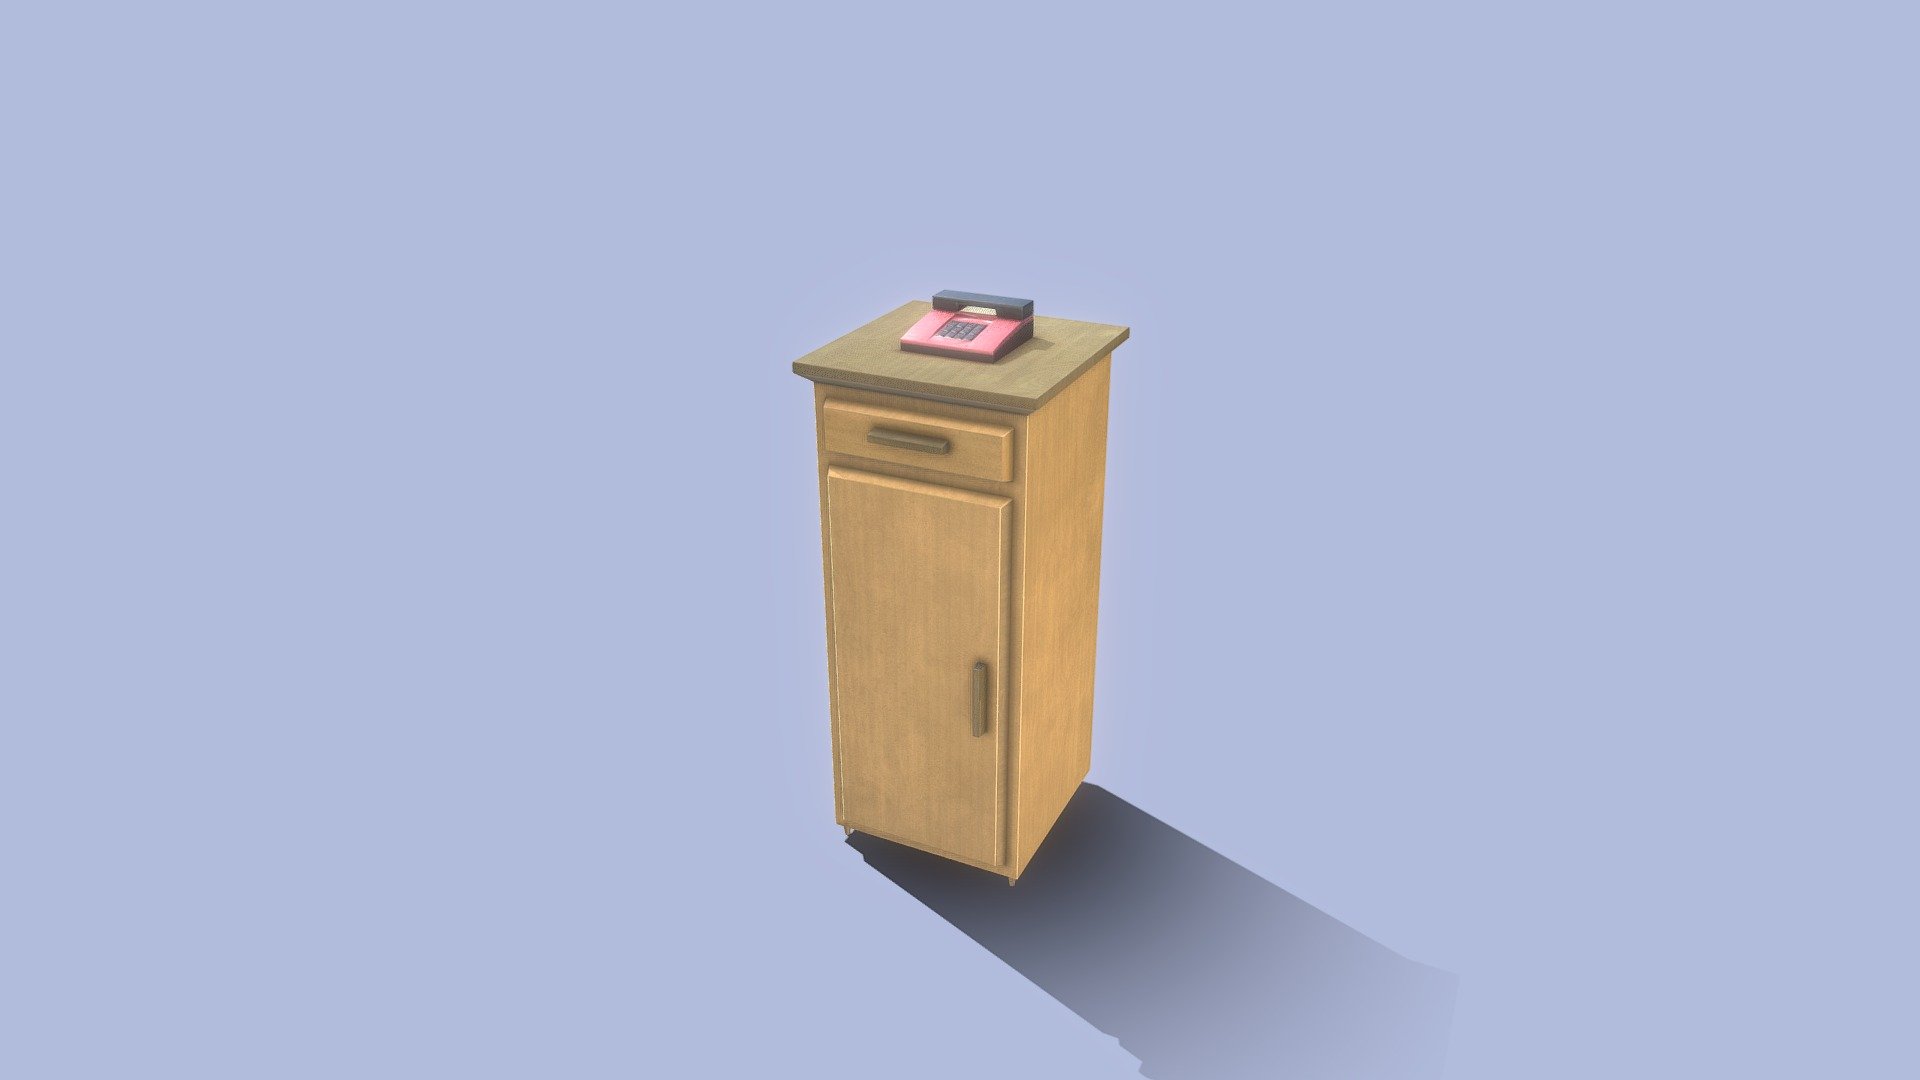 game ready Nightstand & Old phone (lowpoly)